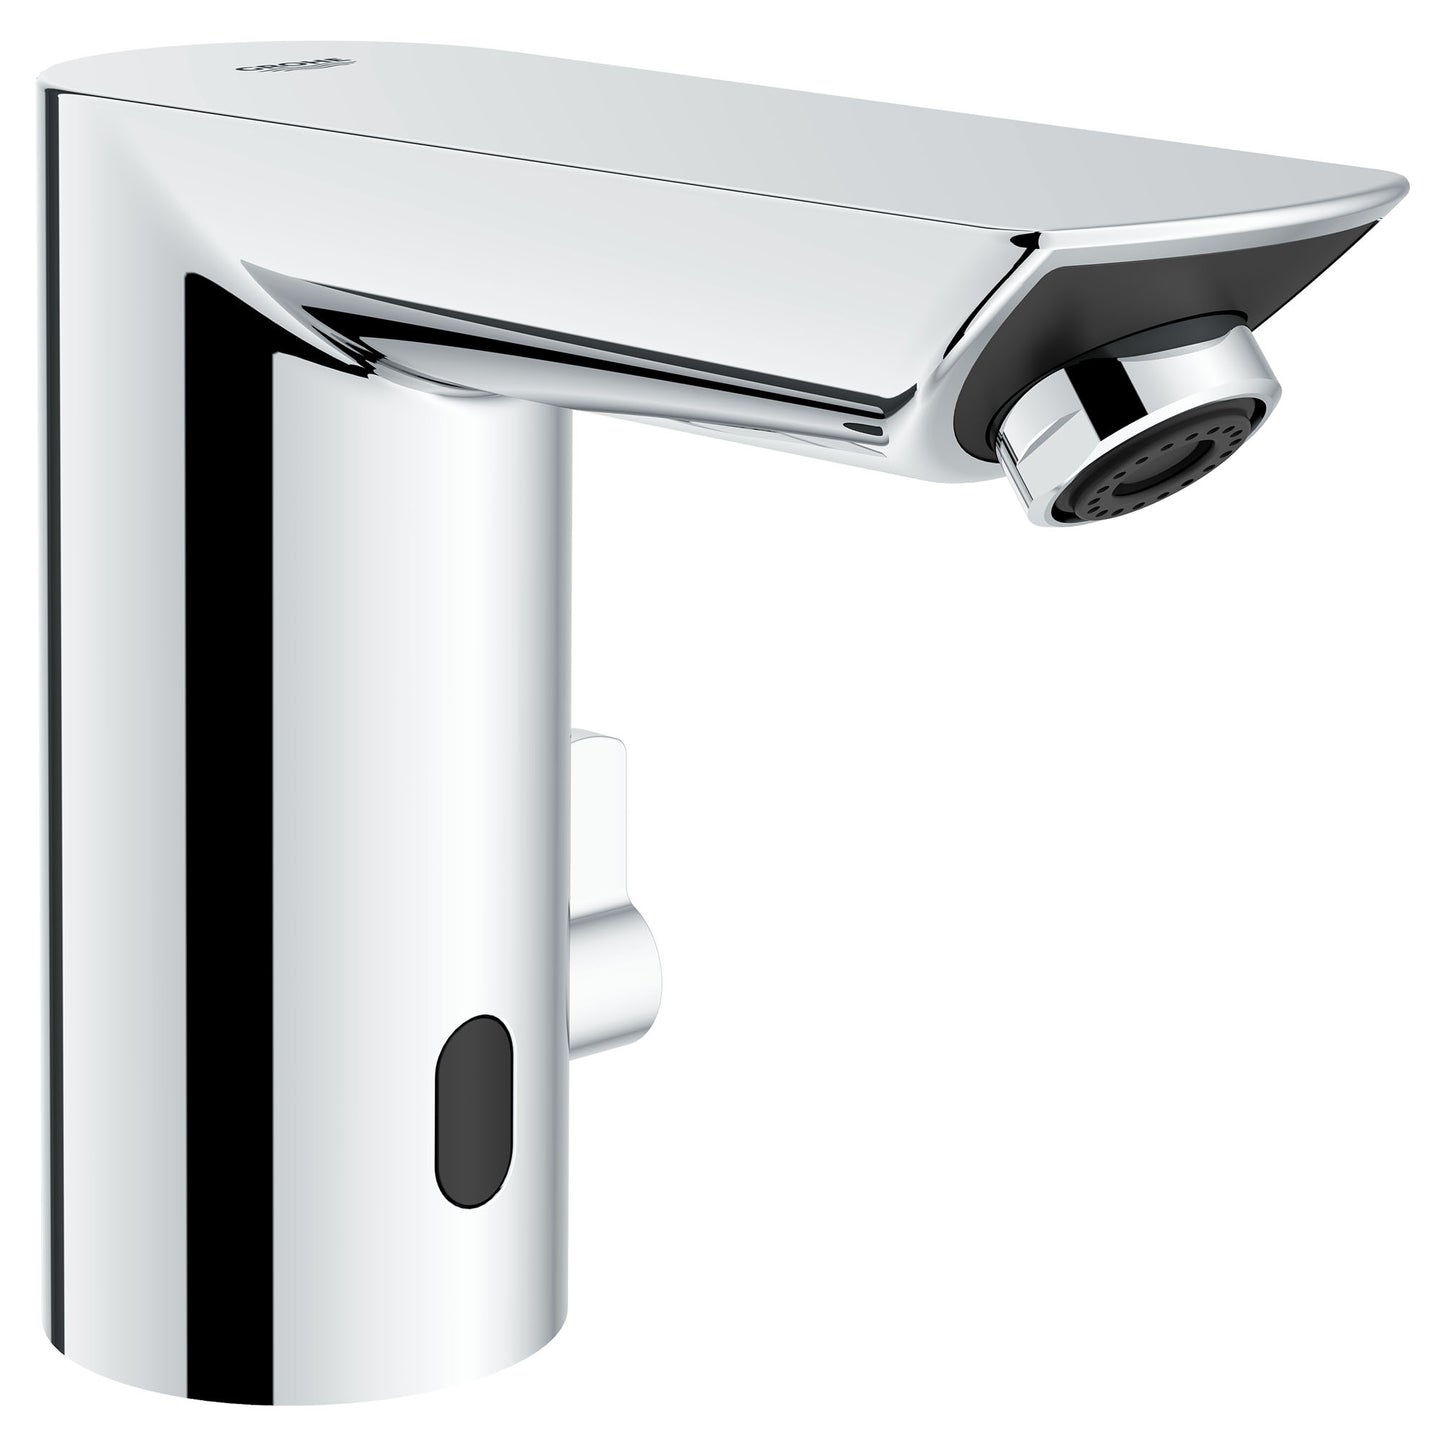 GROHE 36467000 Baucosmopolitan Chrome E Touchless Electronic Faucet with Temperature Control Lever, Battery-Powered